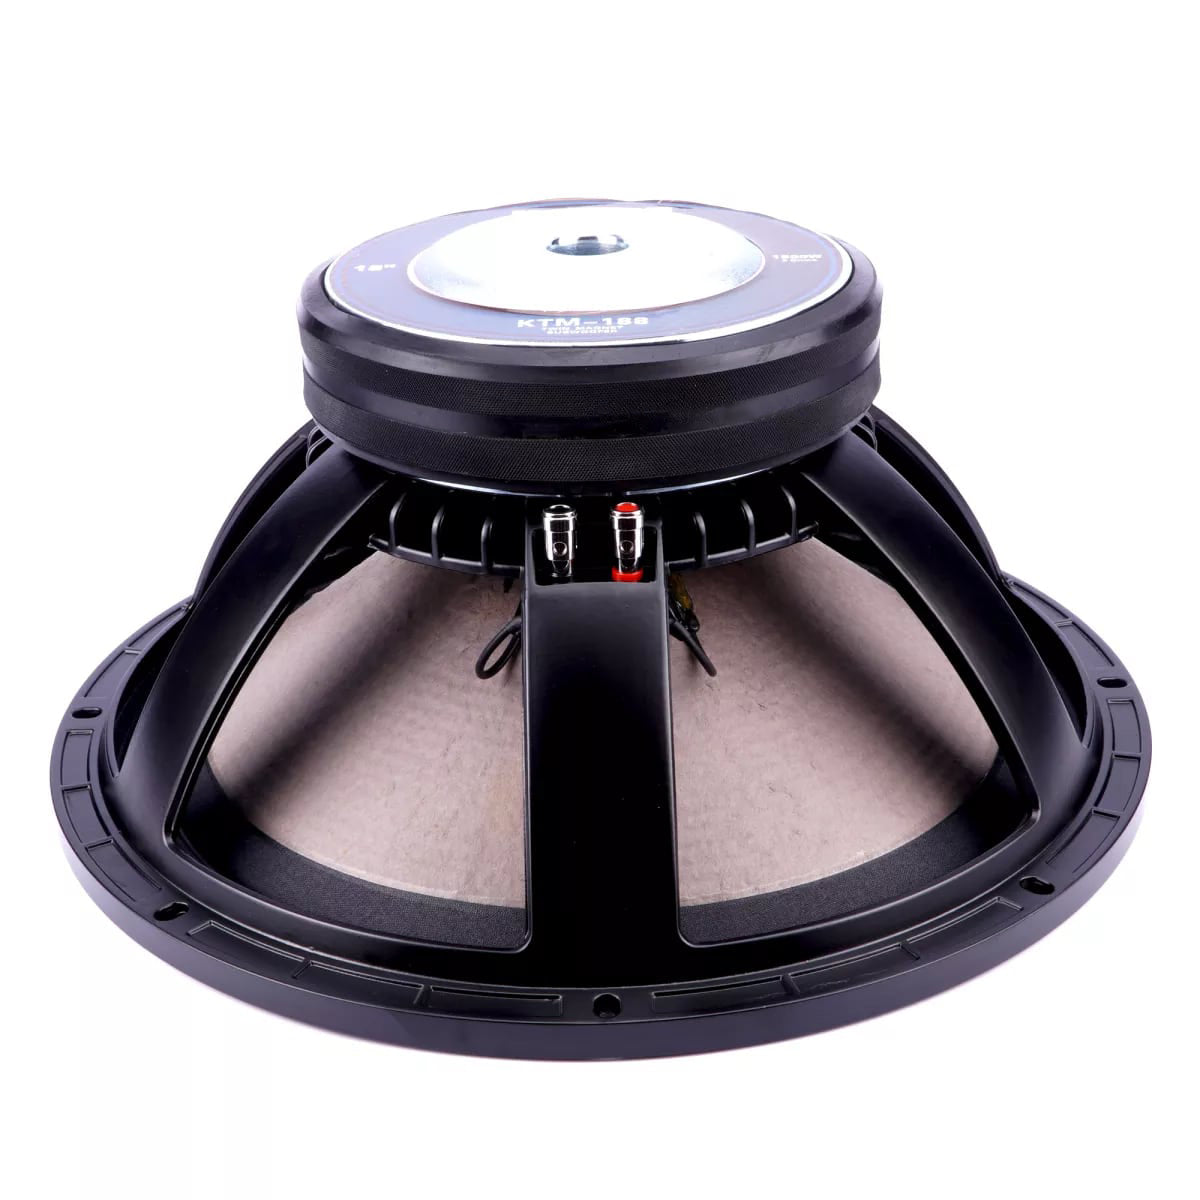 KEVLER KTM-188 Twin Magnet 18" 1500W Dual Damper Subwoofer Driver Instrumental Speaker with 8 Ohm Impedance, 38Hz-2KHz Frequency Response, and 4" Voice Coil